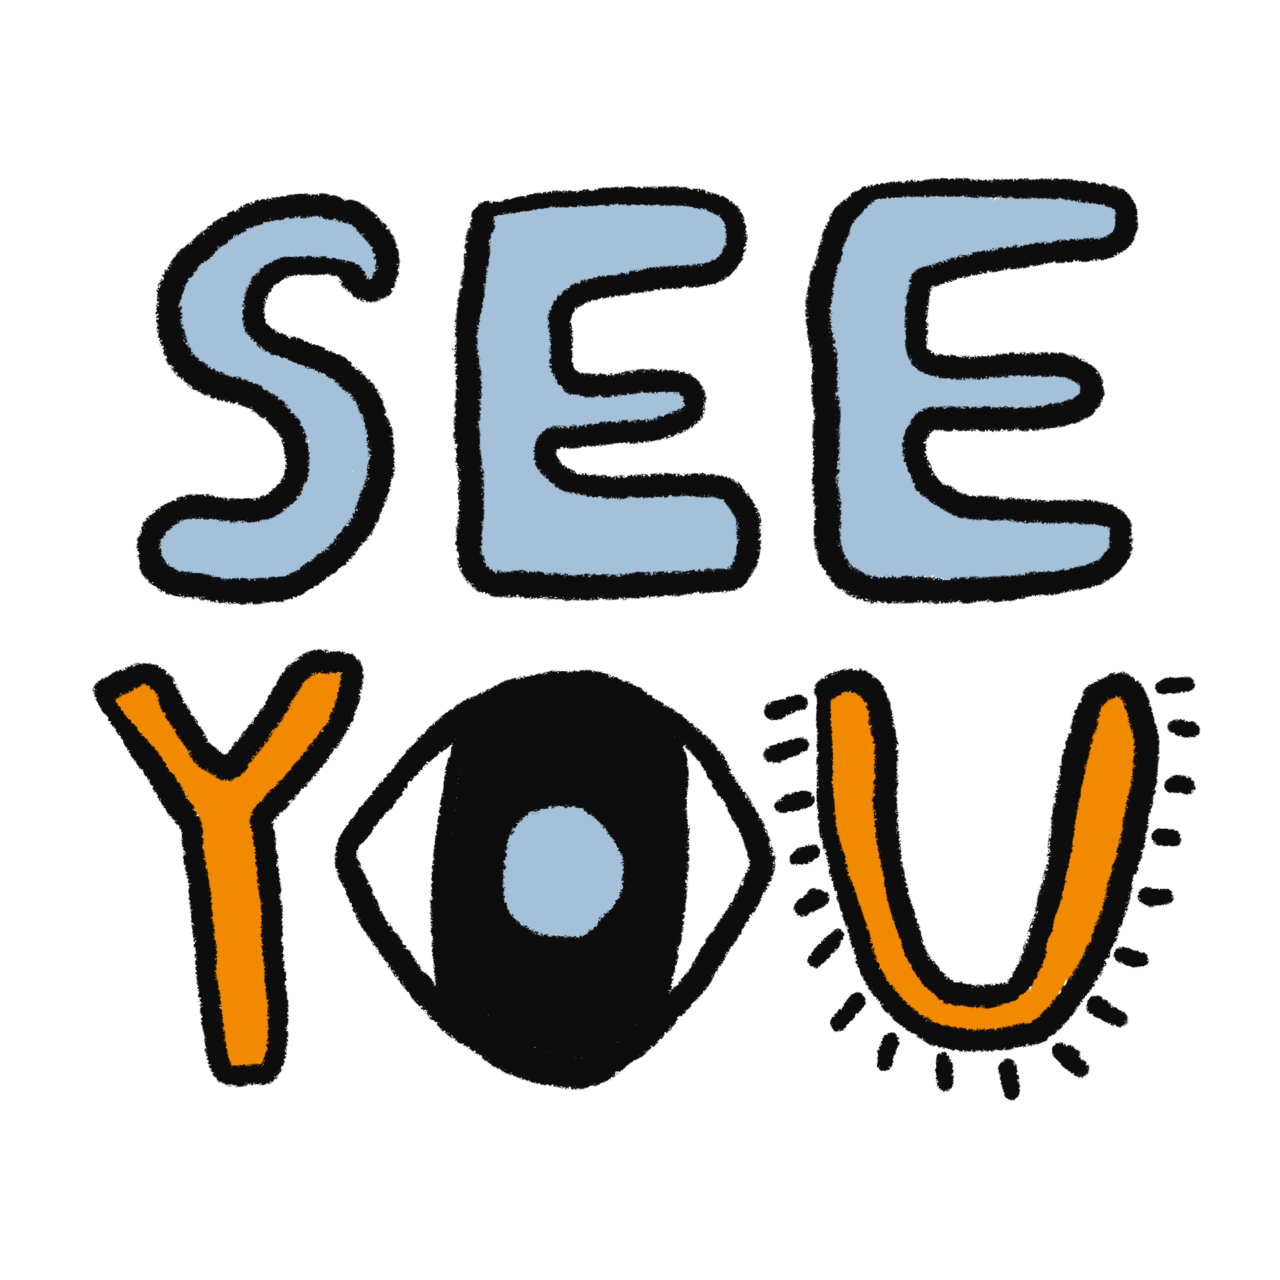 SEE YOU